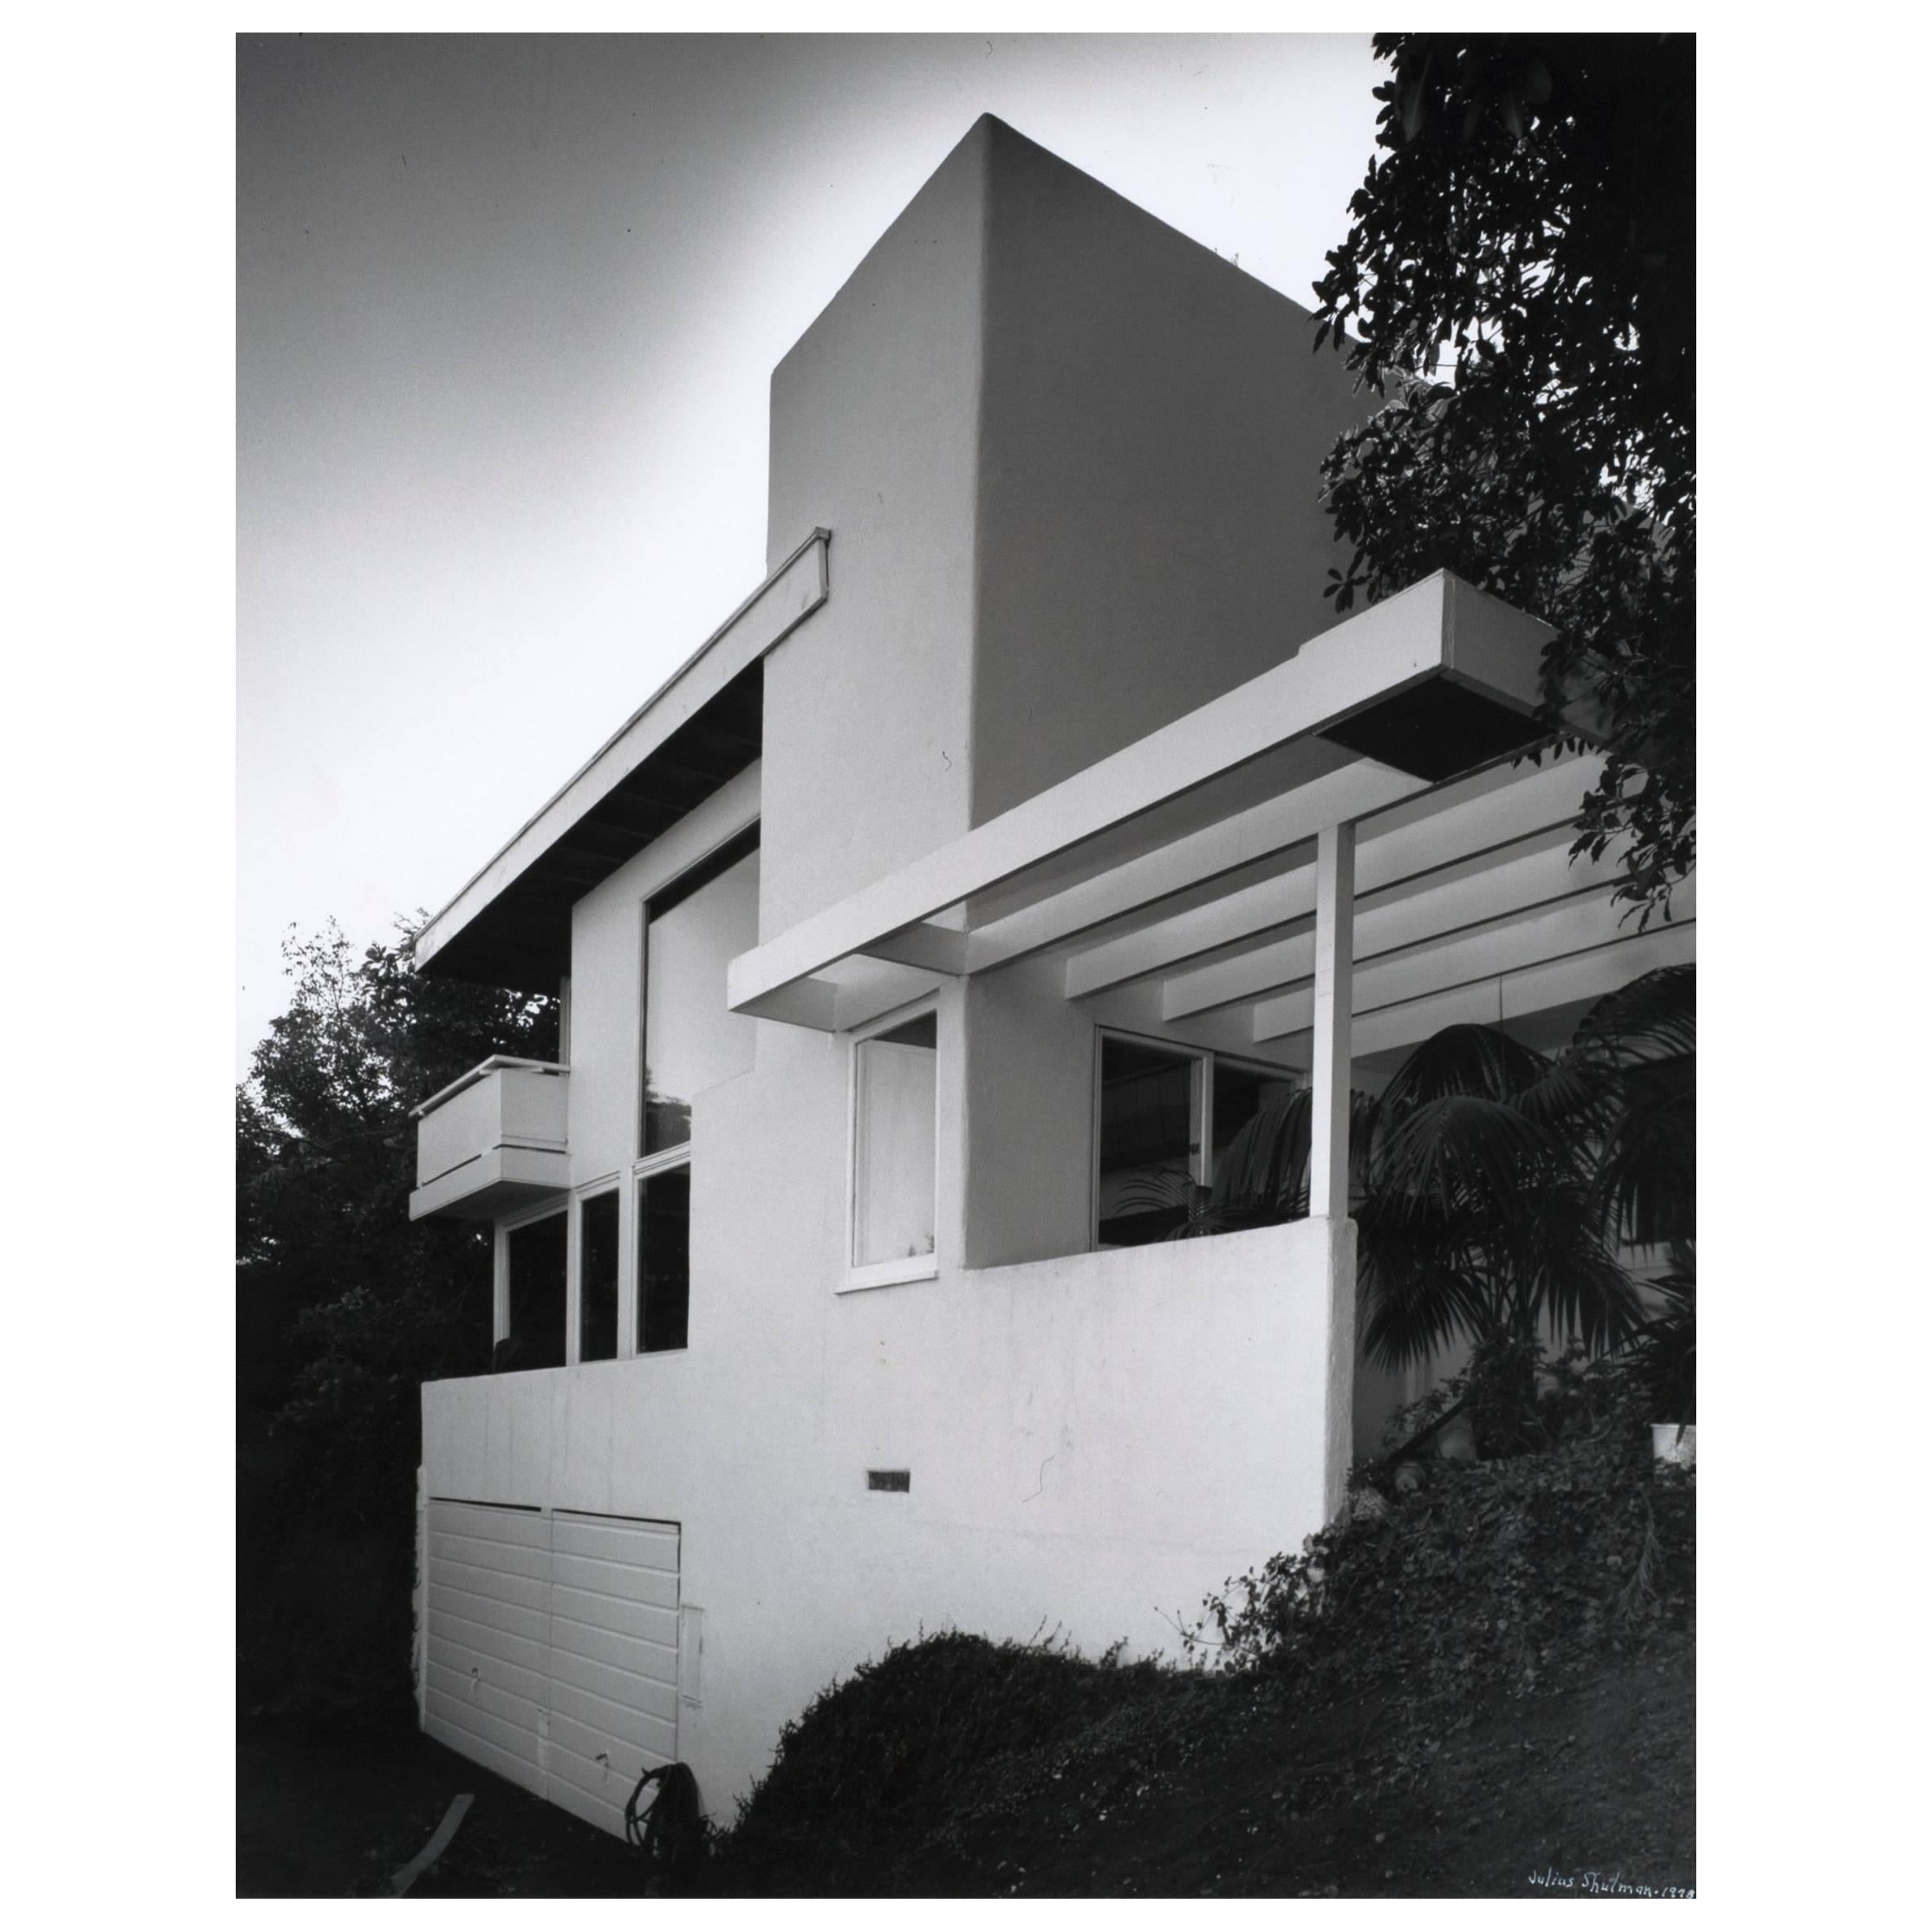 Julius Shulman B & W Photograph of the Droste House by R.M. Schindler